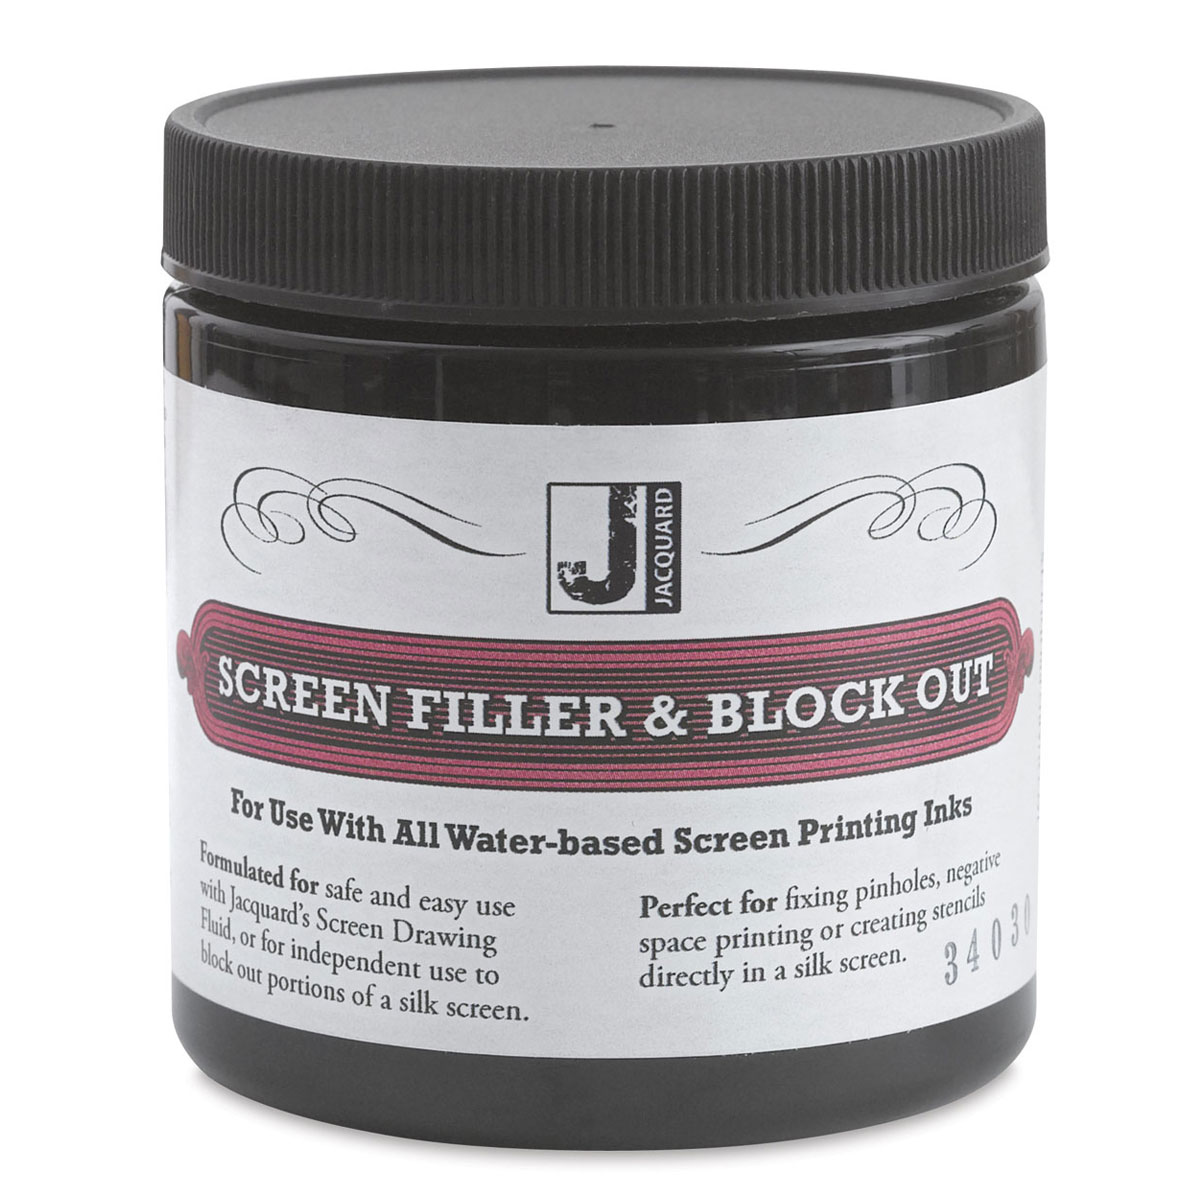 Jacquard Screen Filler and Block Out - 8 oz